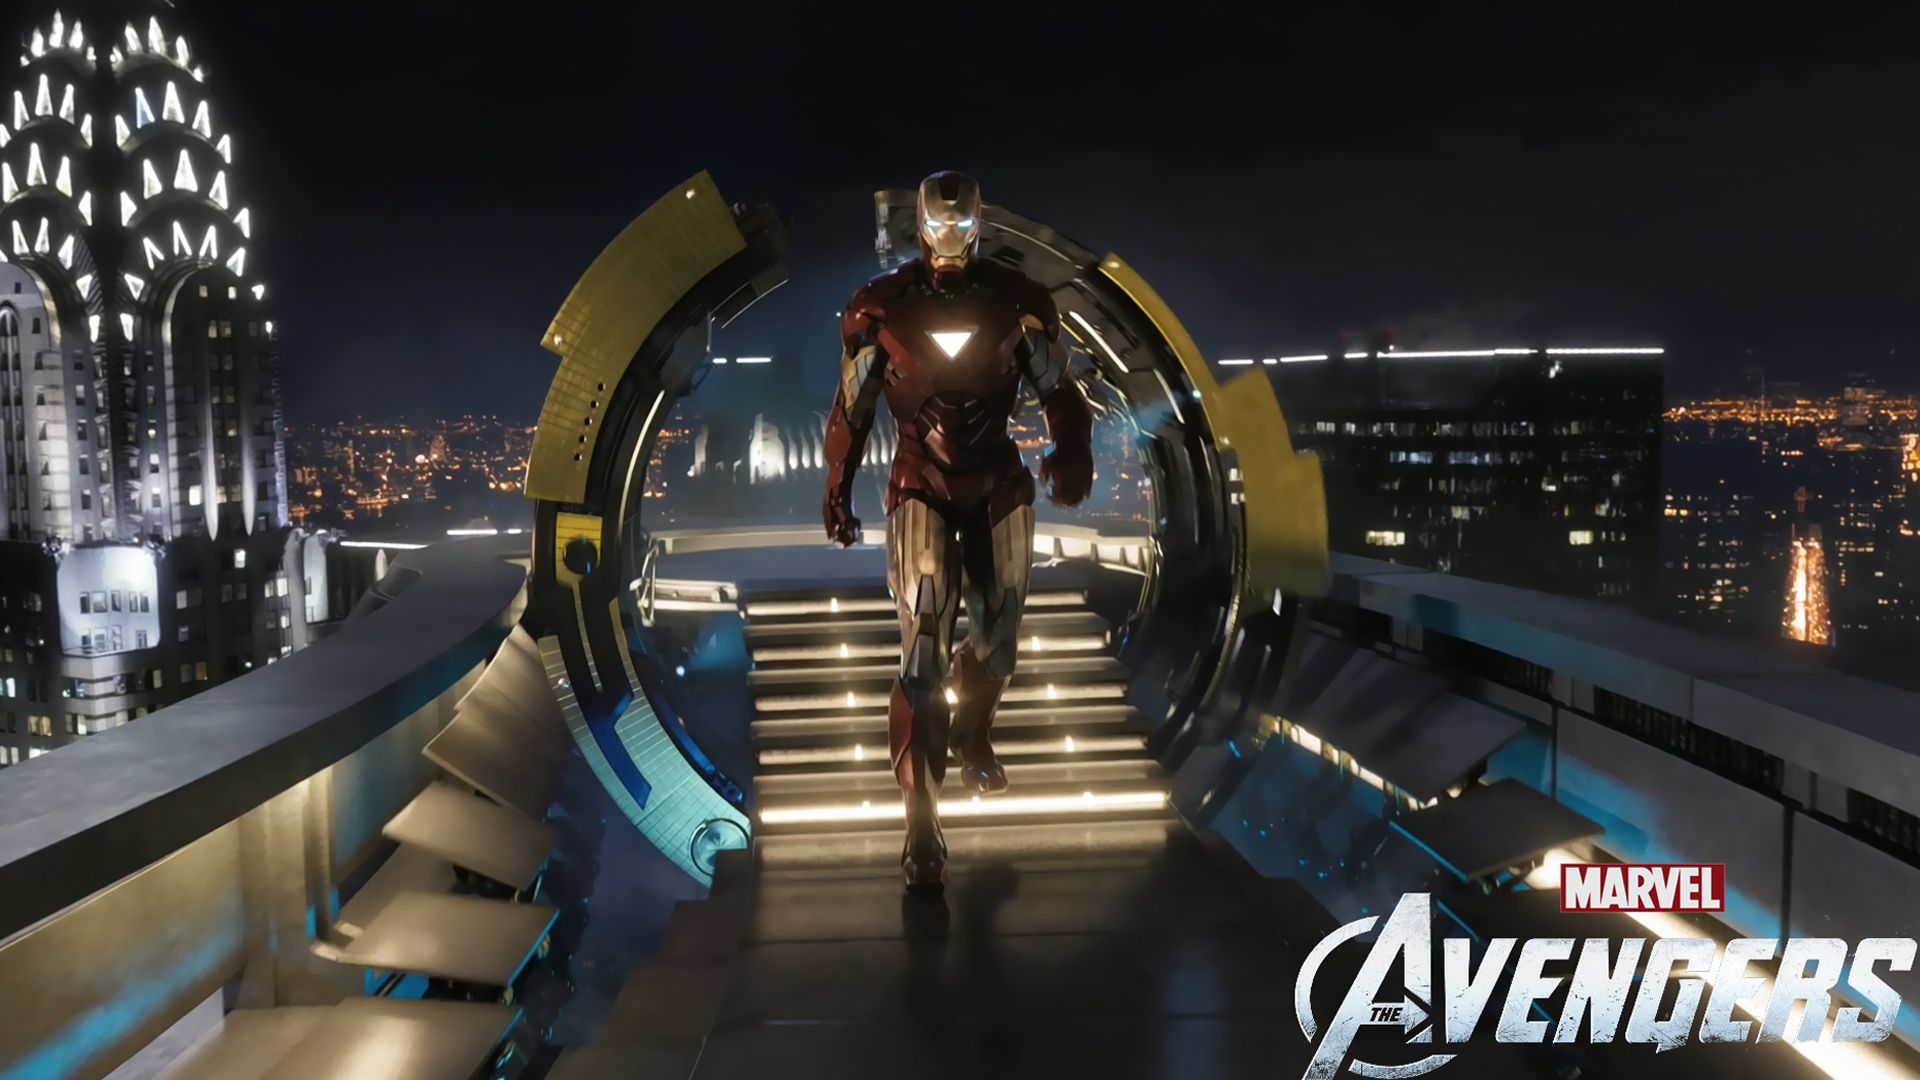 Iron Man in The Avengers Movie Wallpapers | HD Wallpapers